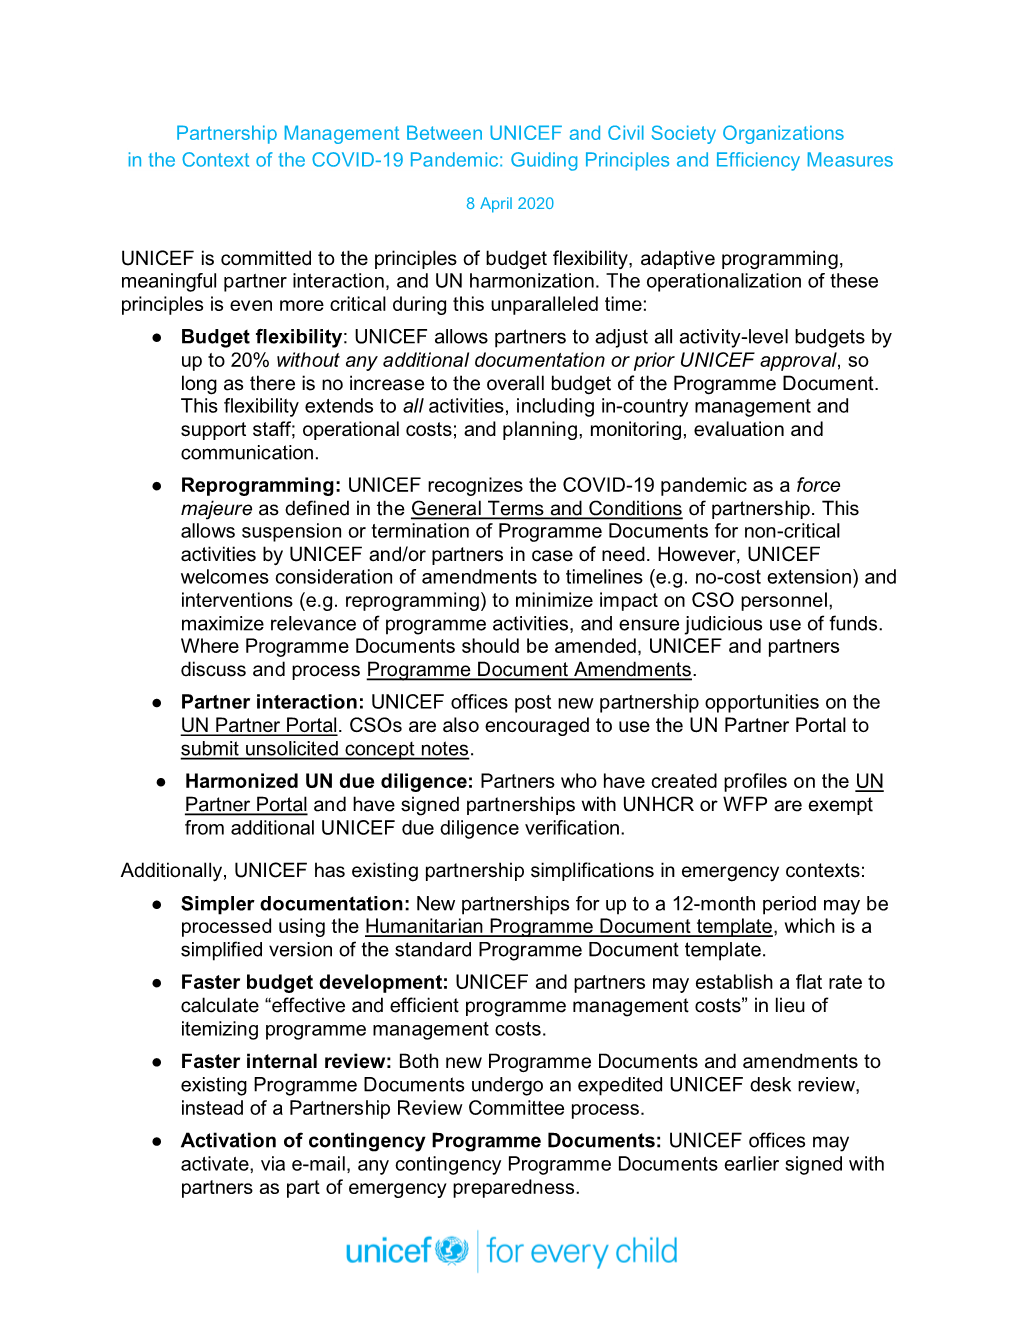 Partnership Management Between UNICEF and Civil Society Organizations in the Context of the COVID-19 Pandemic: Guiding Principles and Efficiency Measures